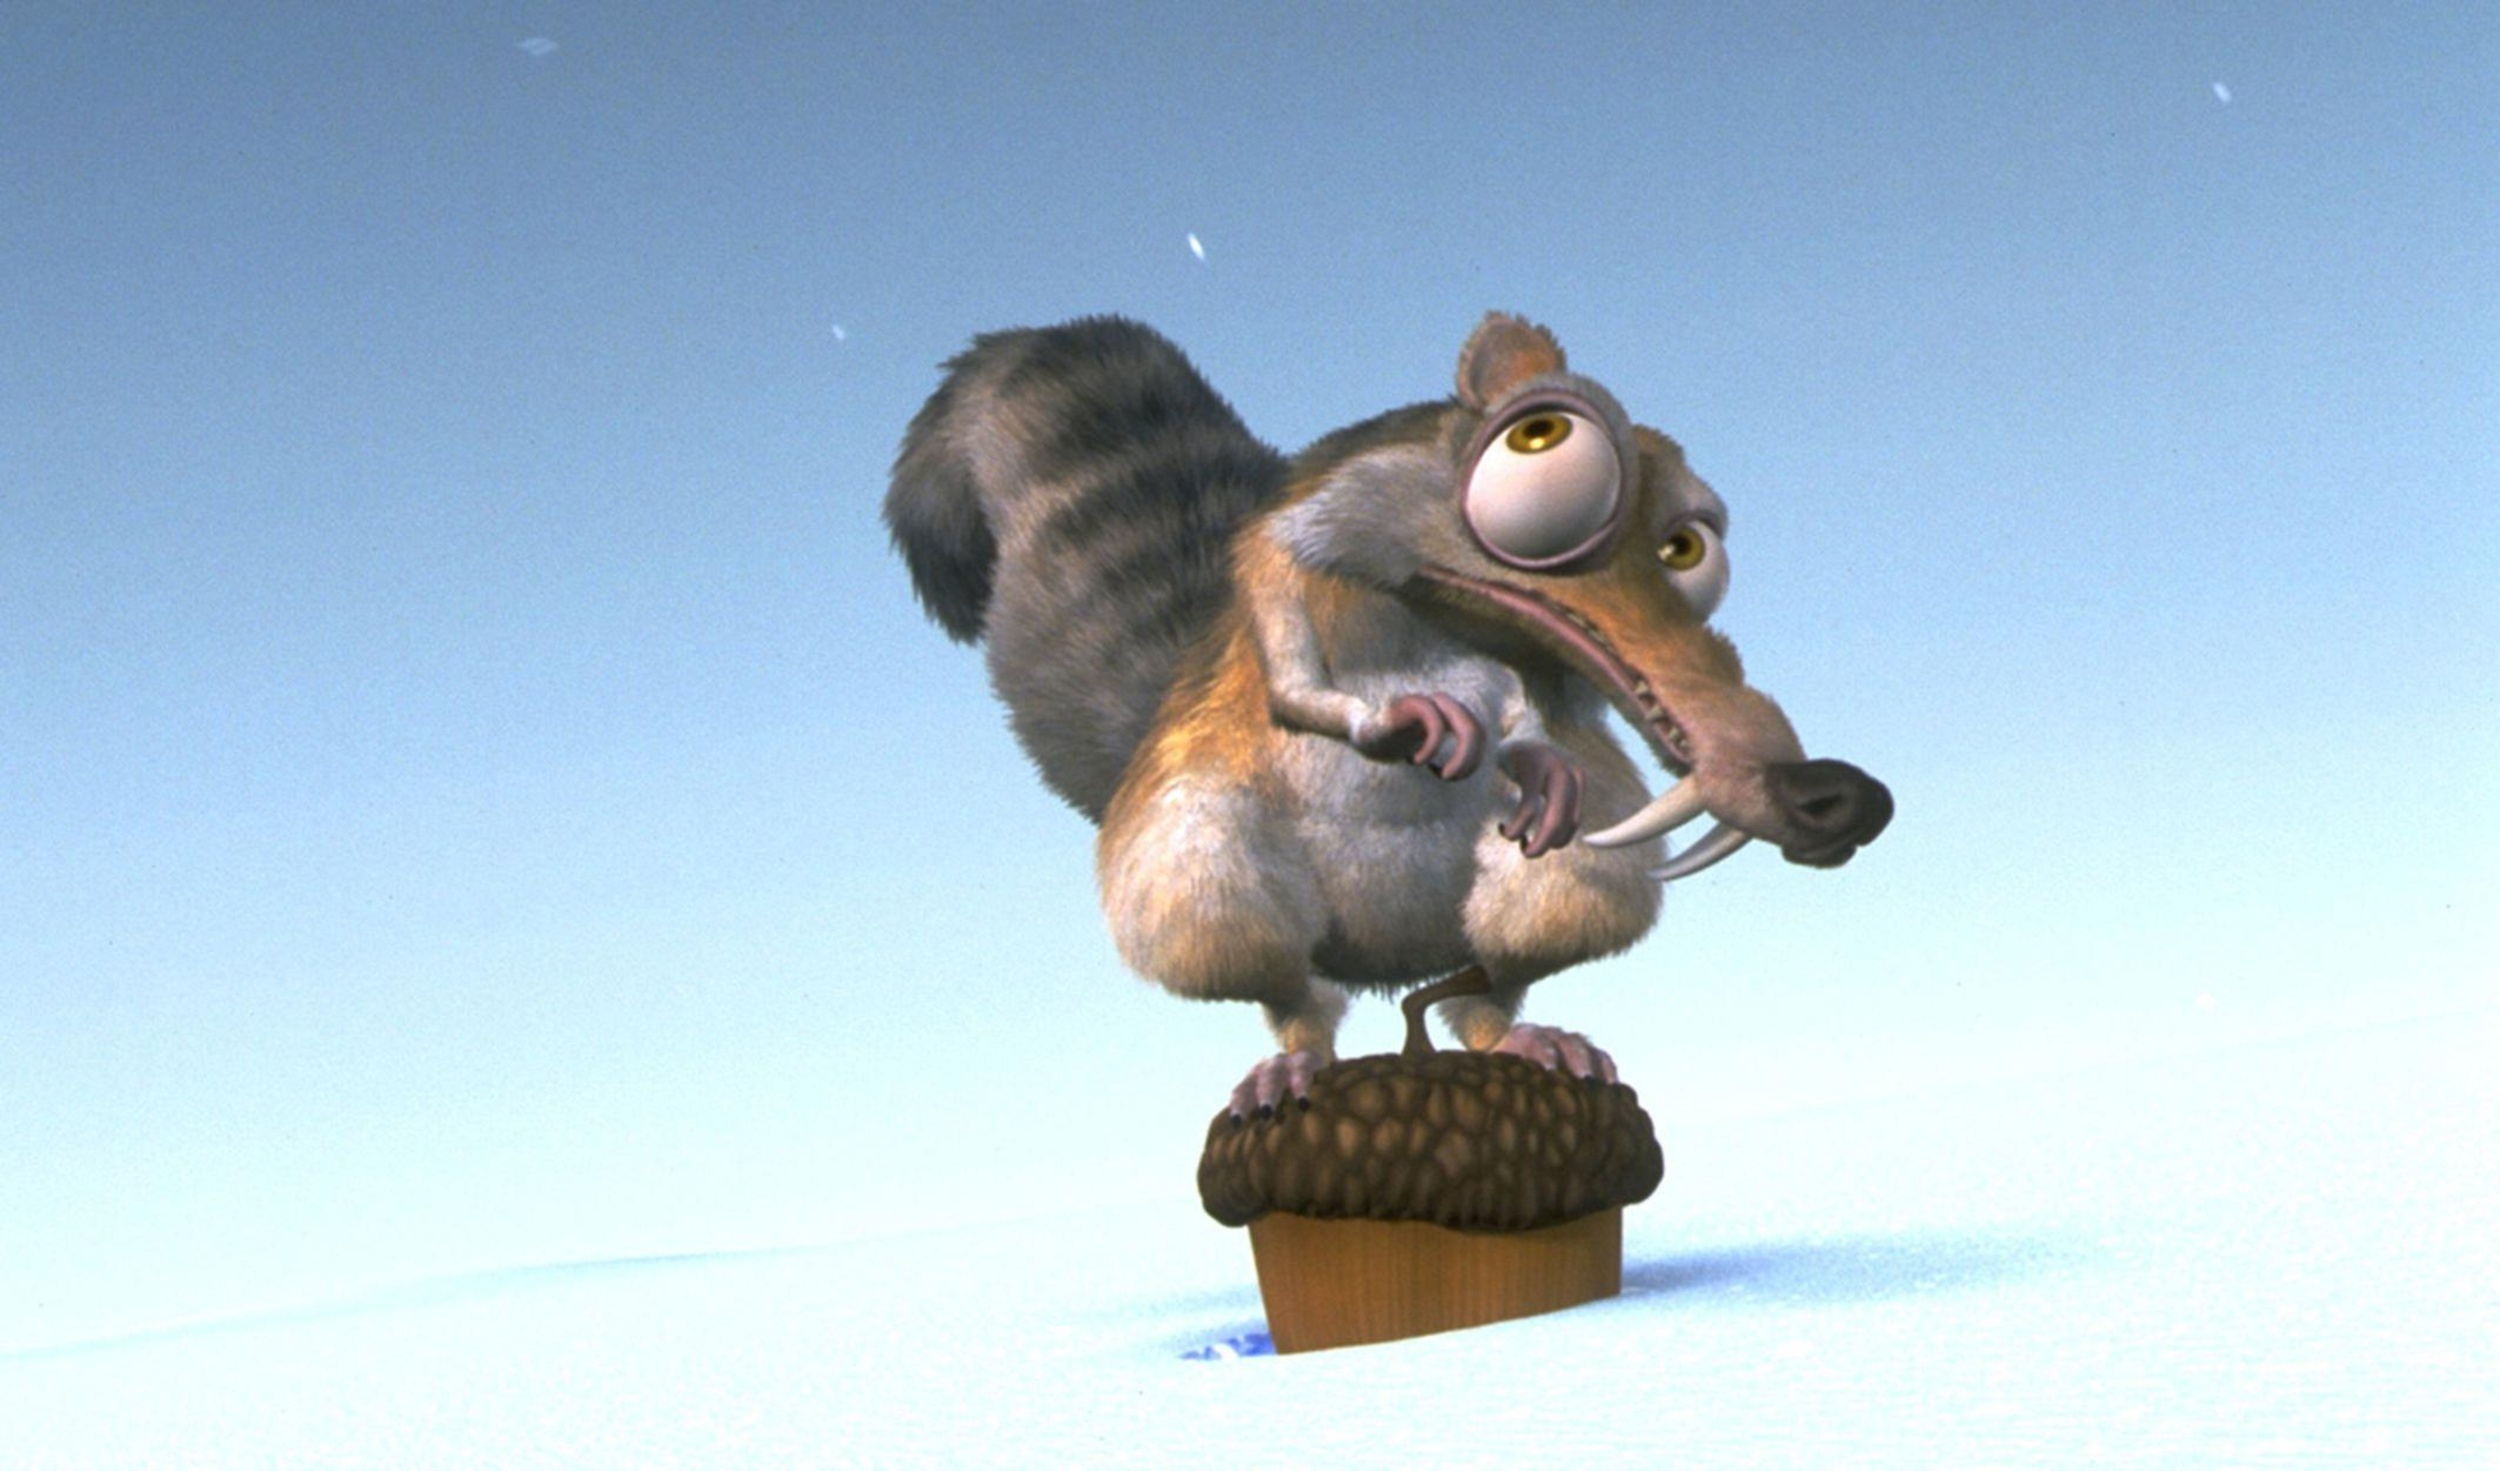 <p><span>In some ways, one could argue that Scrat is the Flavor Flav of the <em>Ice Age</em> franchise — a sort of comedic hype man who also has an undeniable and unexplainable charm.  </span></p><p>You may also like: <a href='https://www.yardbarker.com/entertainment/articles/one_and_done_20_great_films_we_never_want_to_watch_again_032824/s1__38983183'>One and done: 20 great films we never want to watch again</a></p>